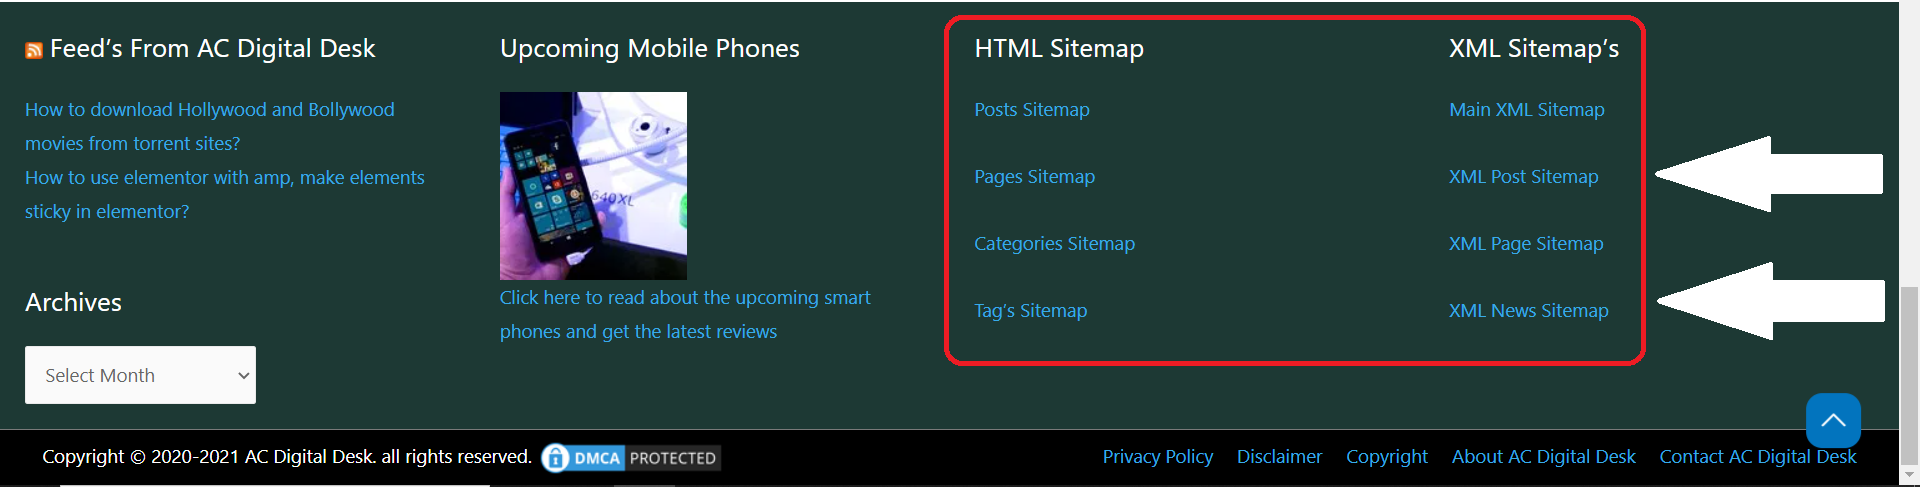 How to add an HTML sitemap to a WordPress website?